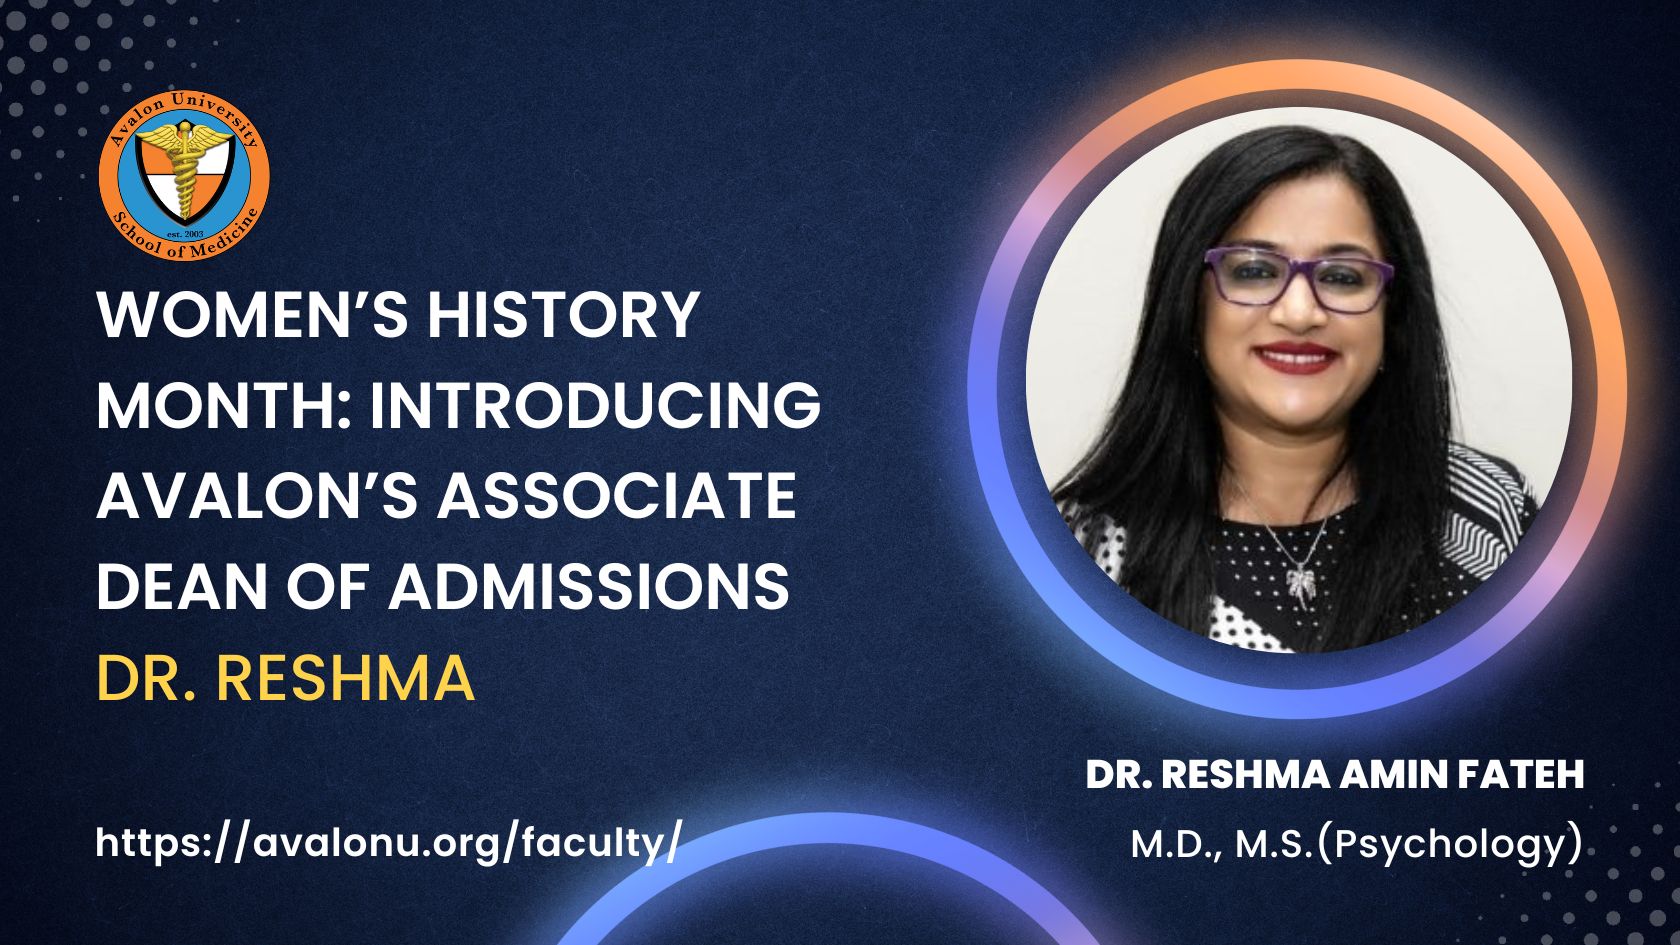 Women’s History Month Introducing Dr. Reshma